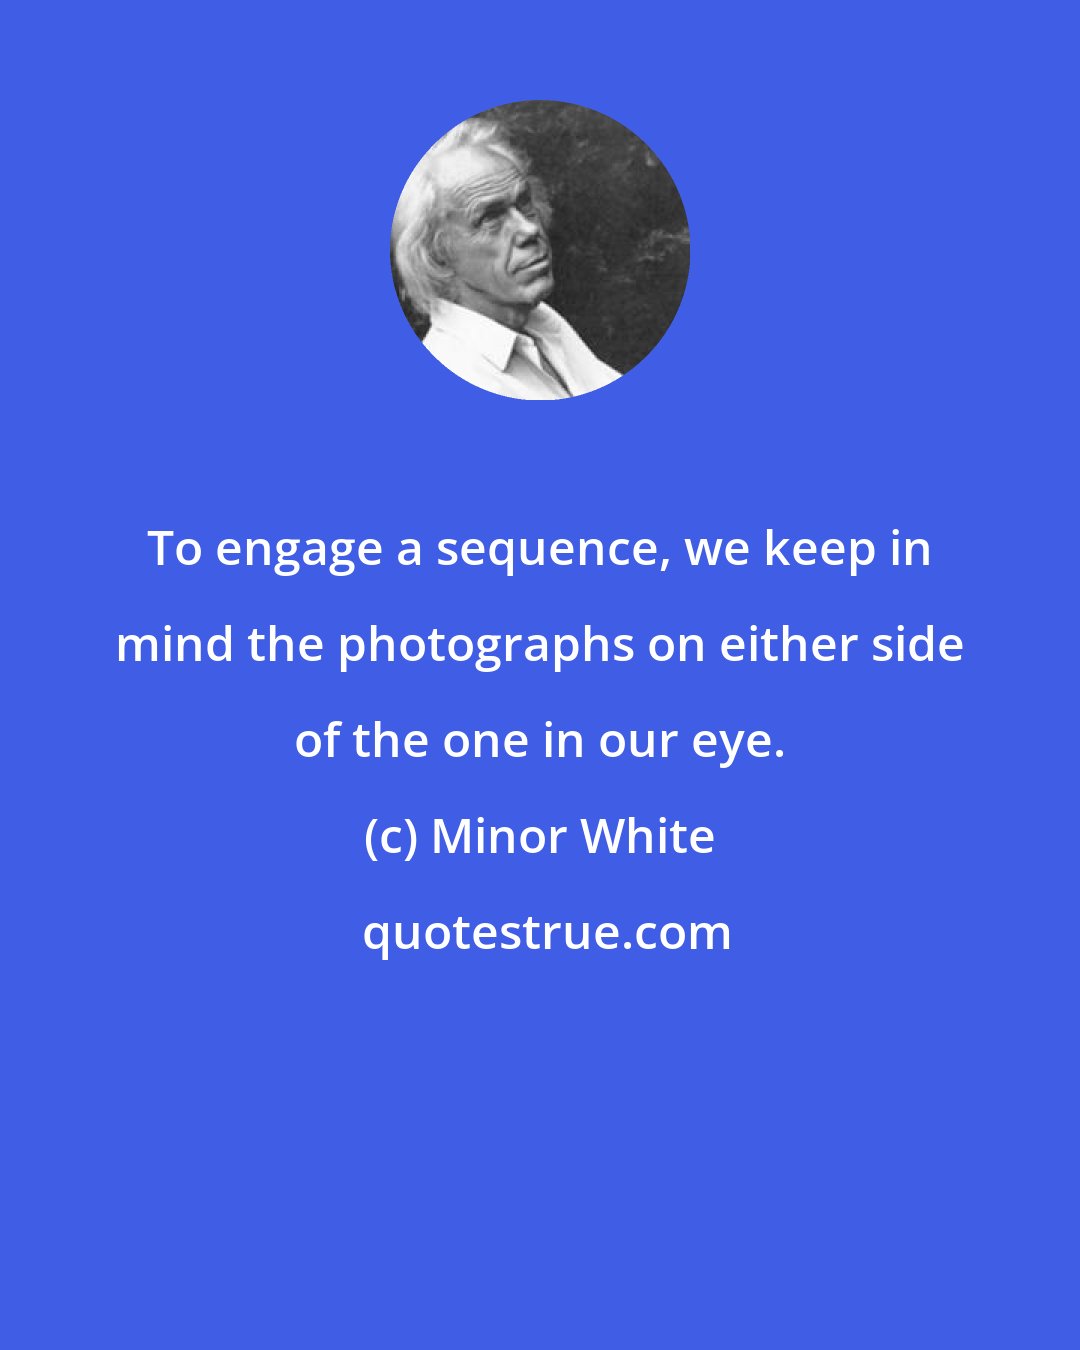 Minor White: To engage a sequence, we keep in mind the photographs on either side of the one in our eye.